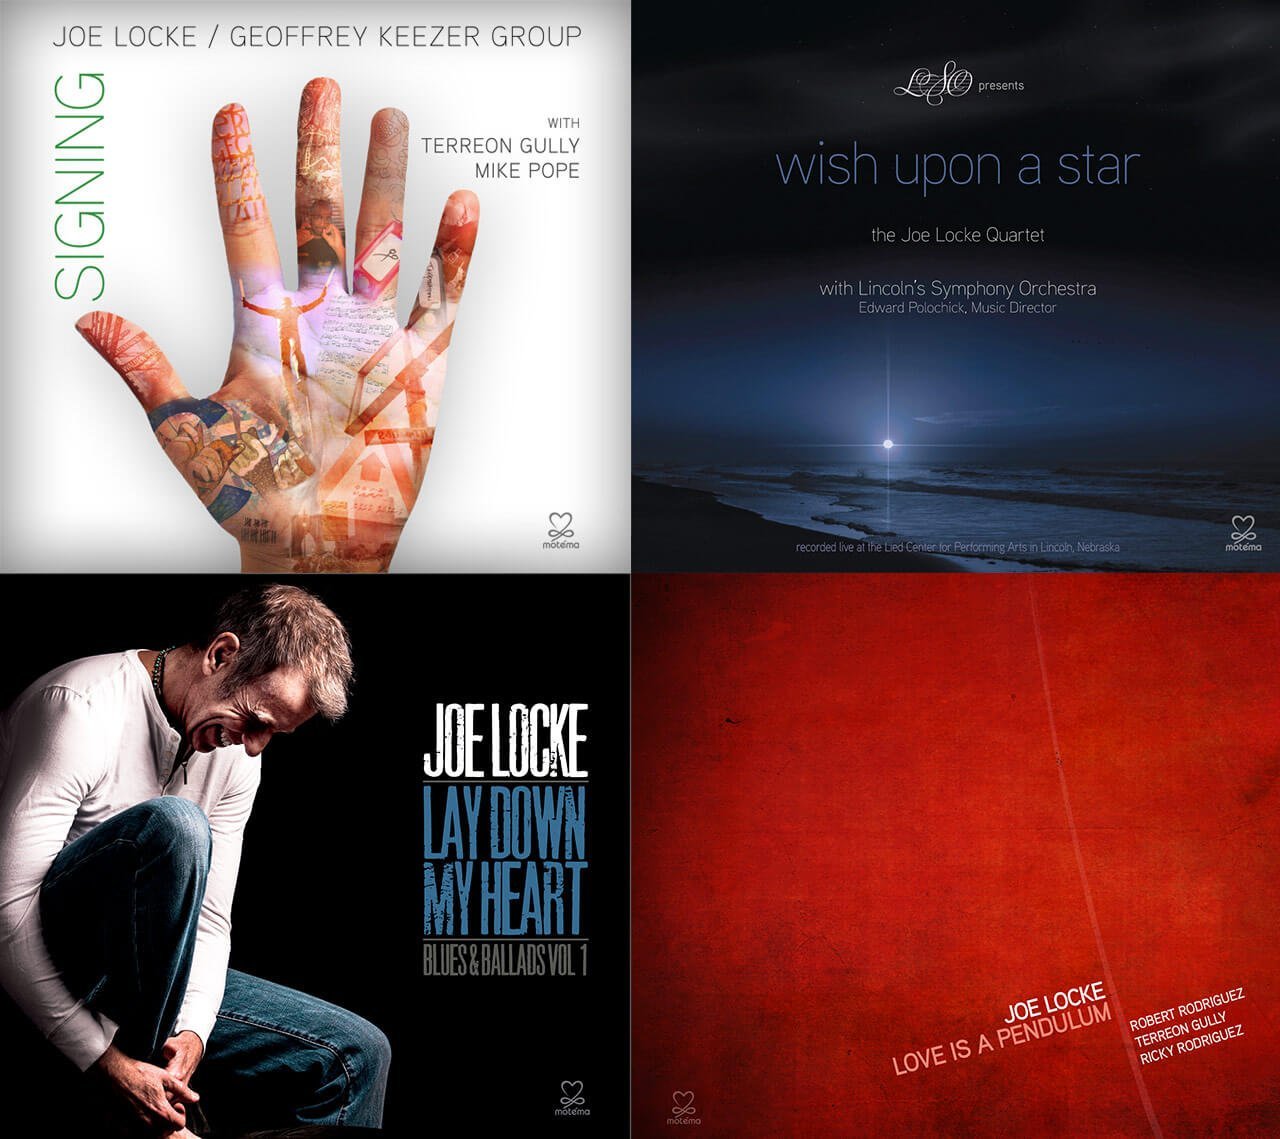 Special Motéma mp3 package deal – save more than $8.00!: download Joe Locke’s latest four...